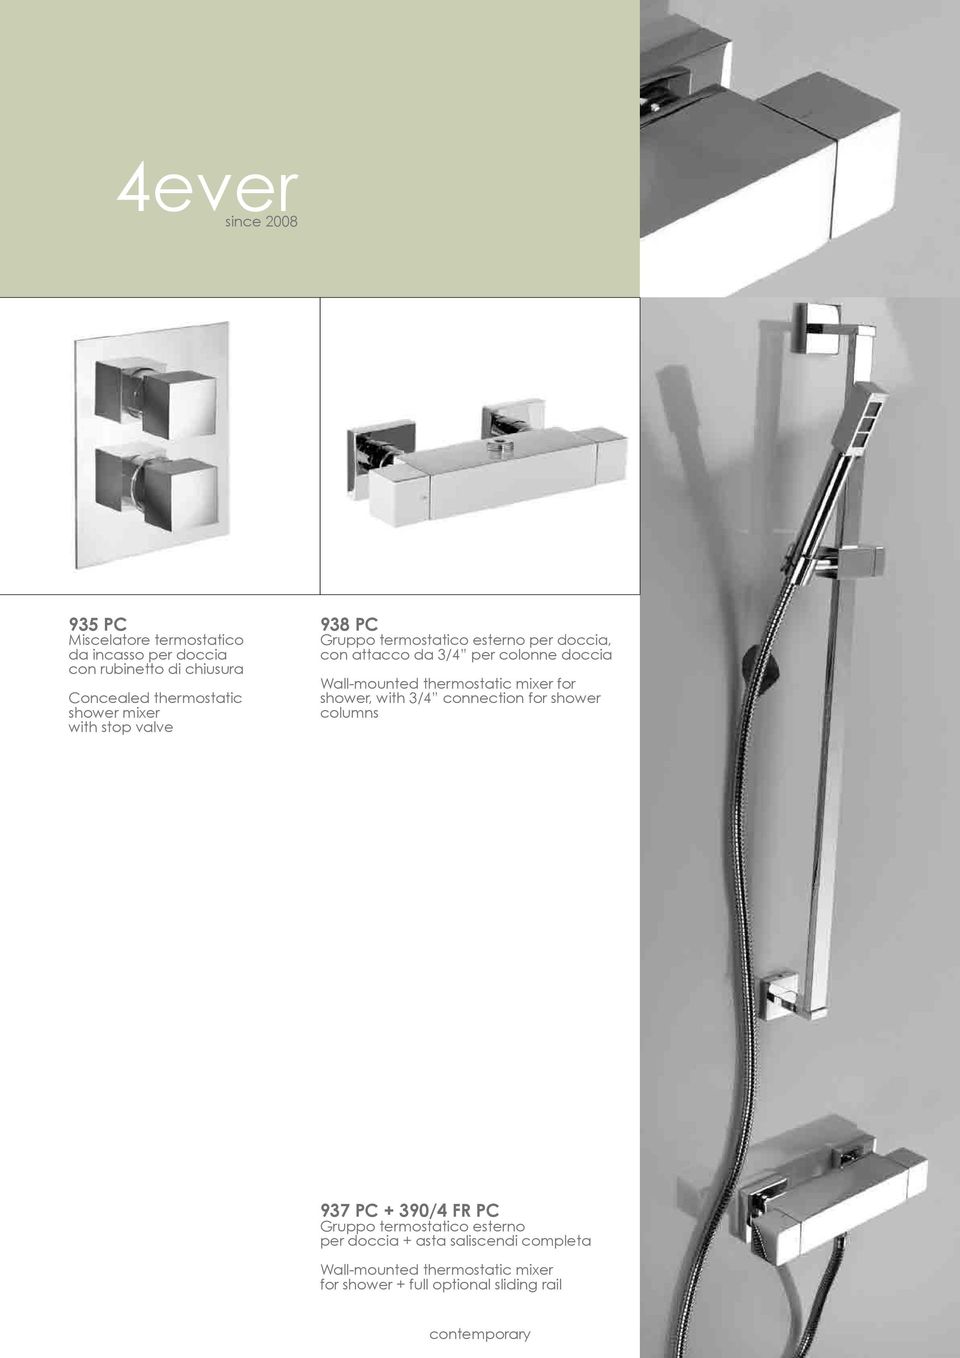 colonne doccia Wall-mounted thermostatic mixer for shower, with 3/4 connection for shower columns 937 PC + 390/4 FR PC